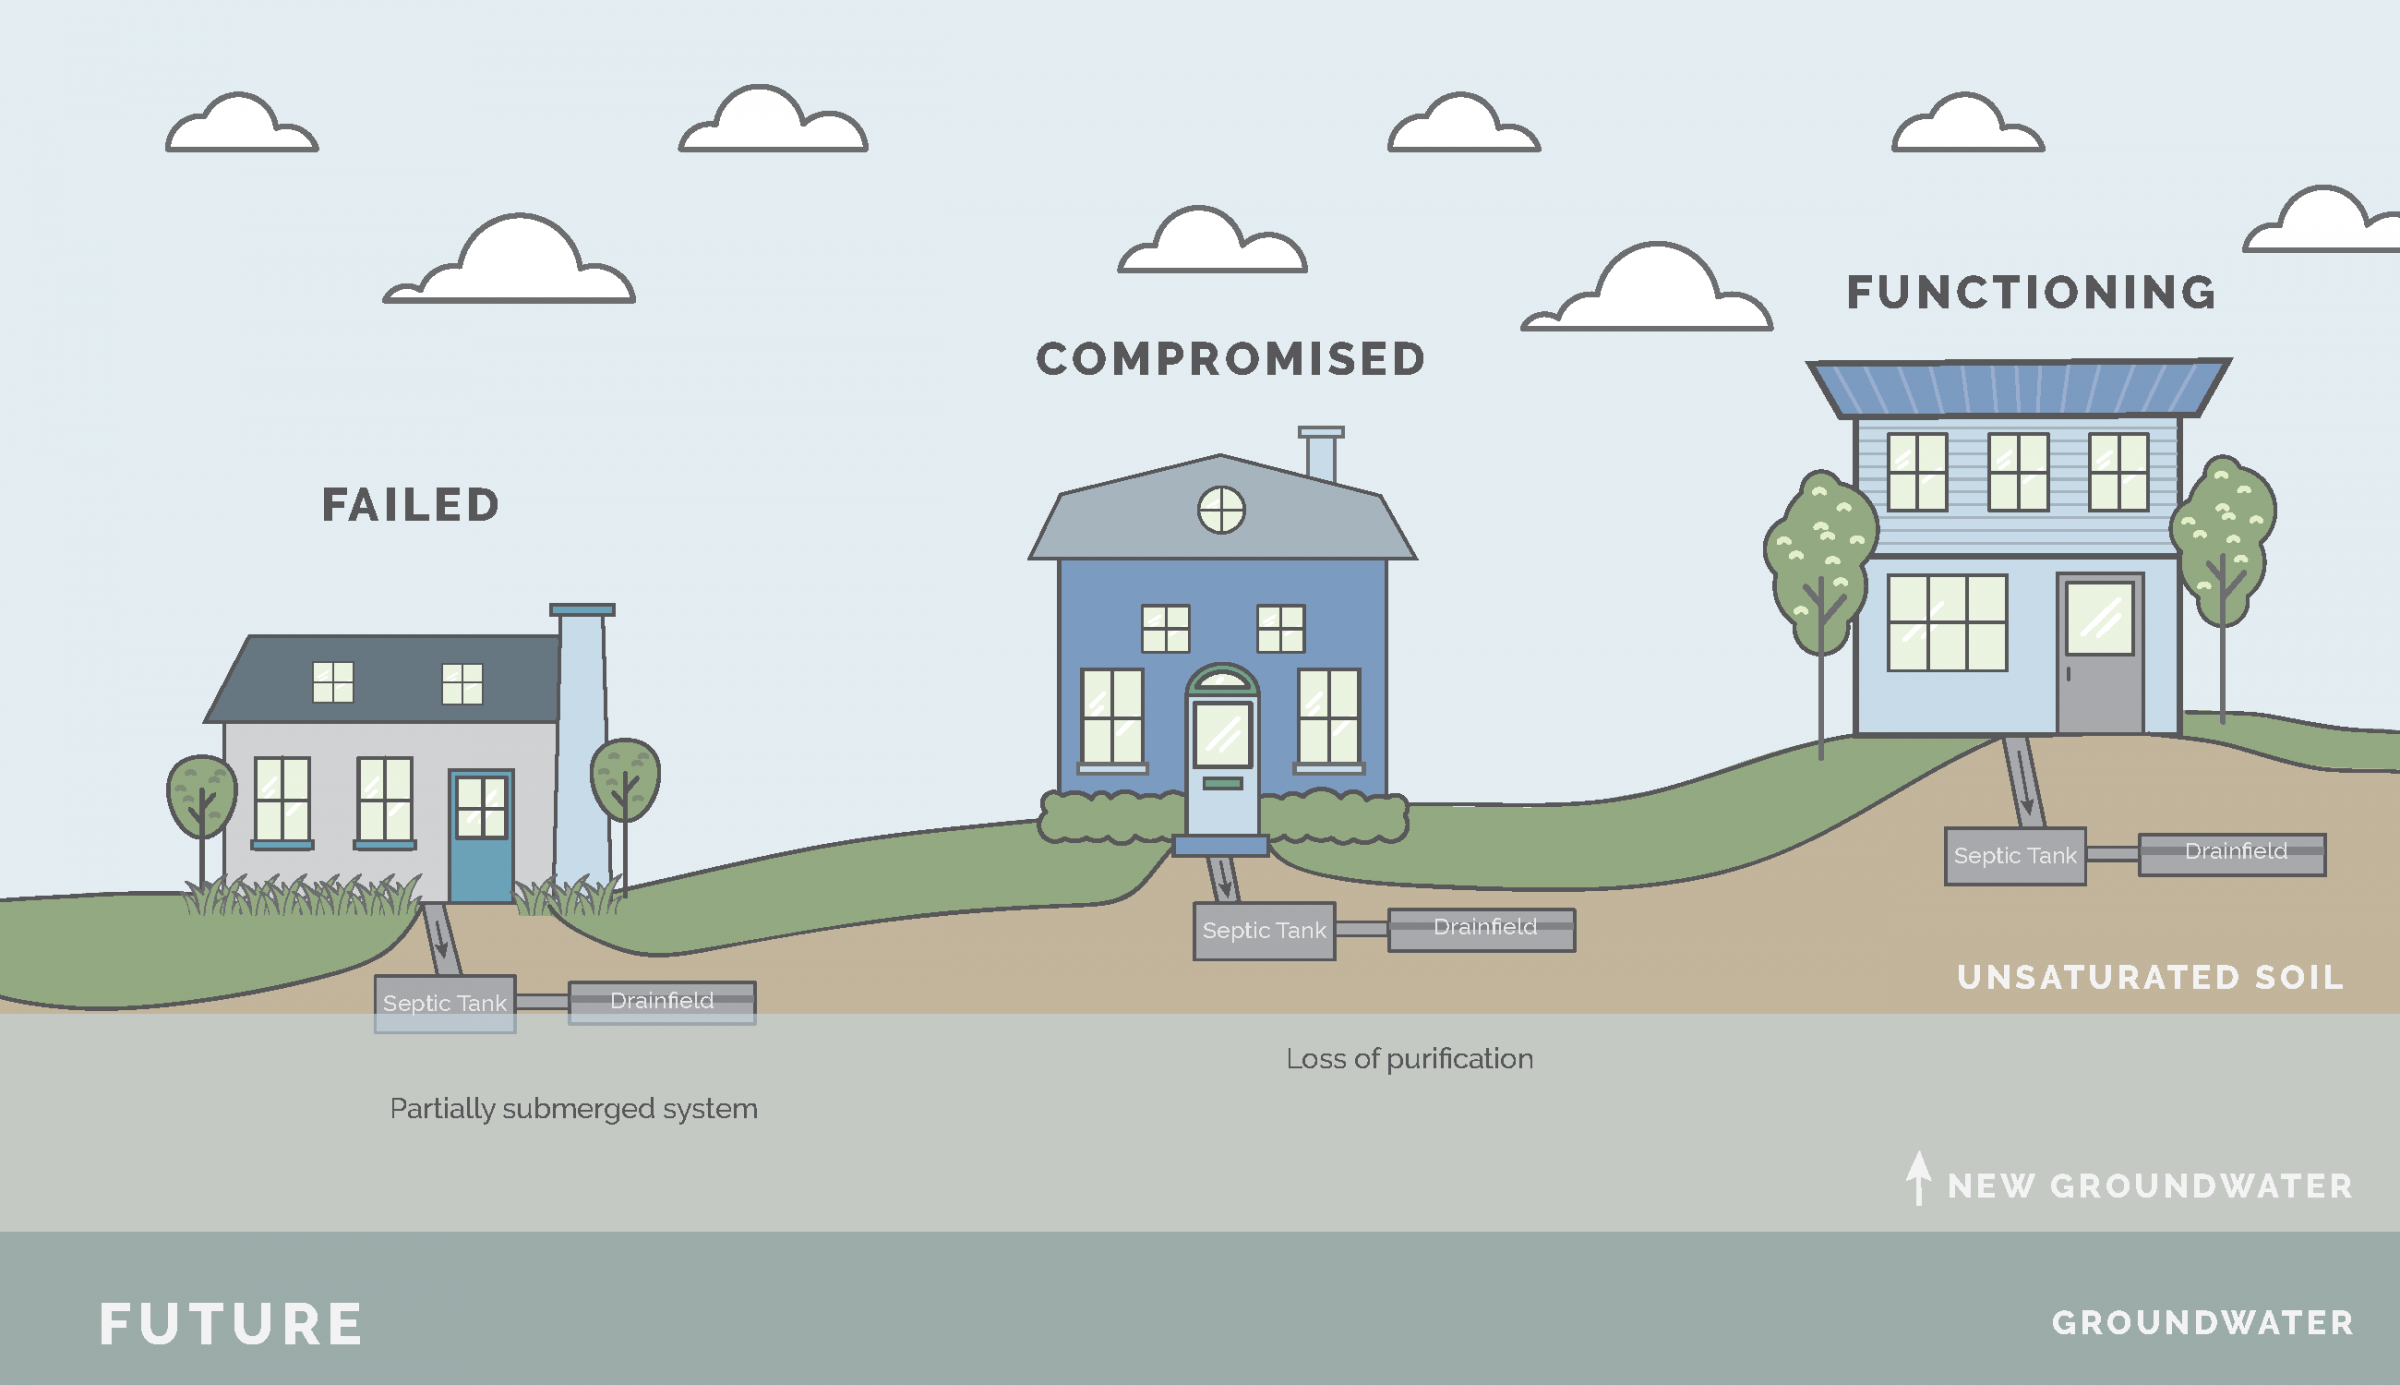 Rising water levels encroach on the soil that's essential for filtering water from septic tanks before it reaches the groundwater. Image courtesy of UGA Carl Vinson Institute.